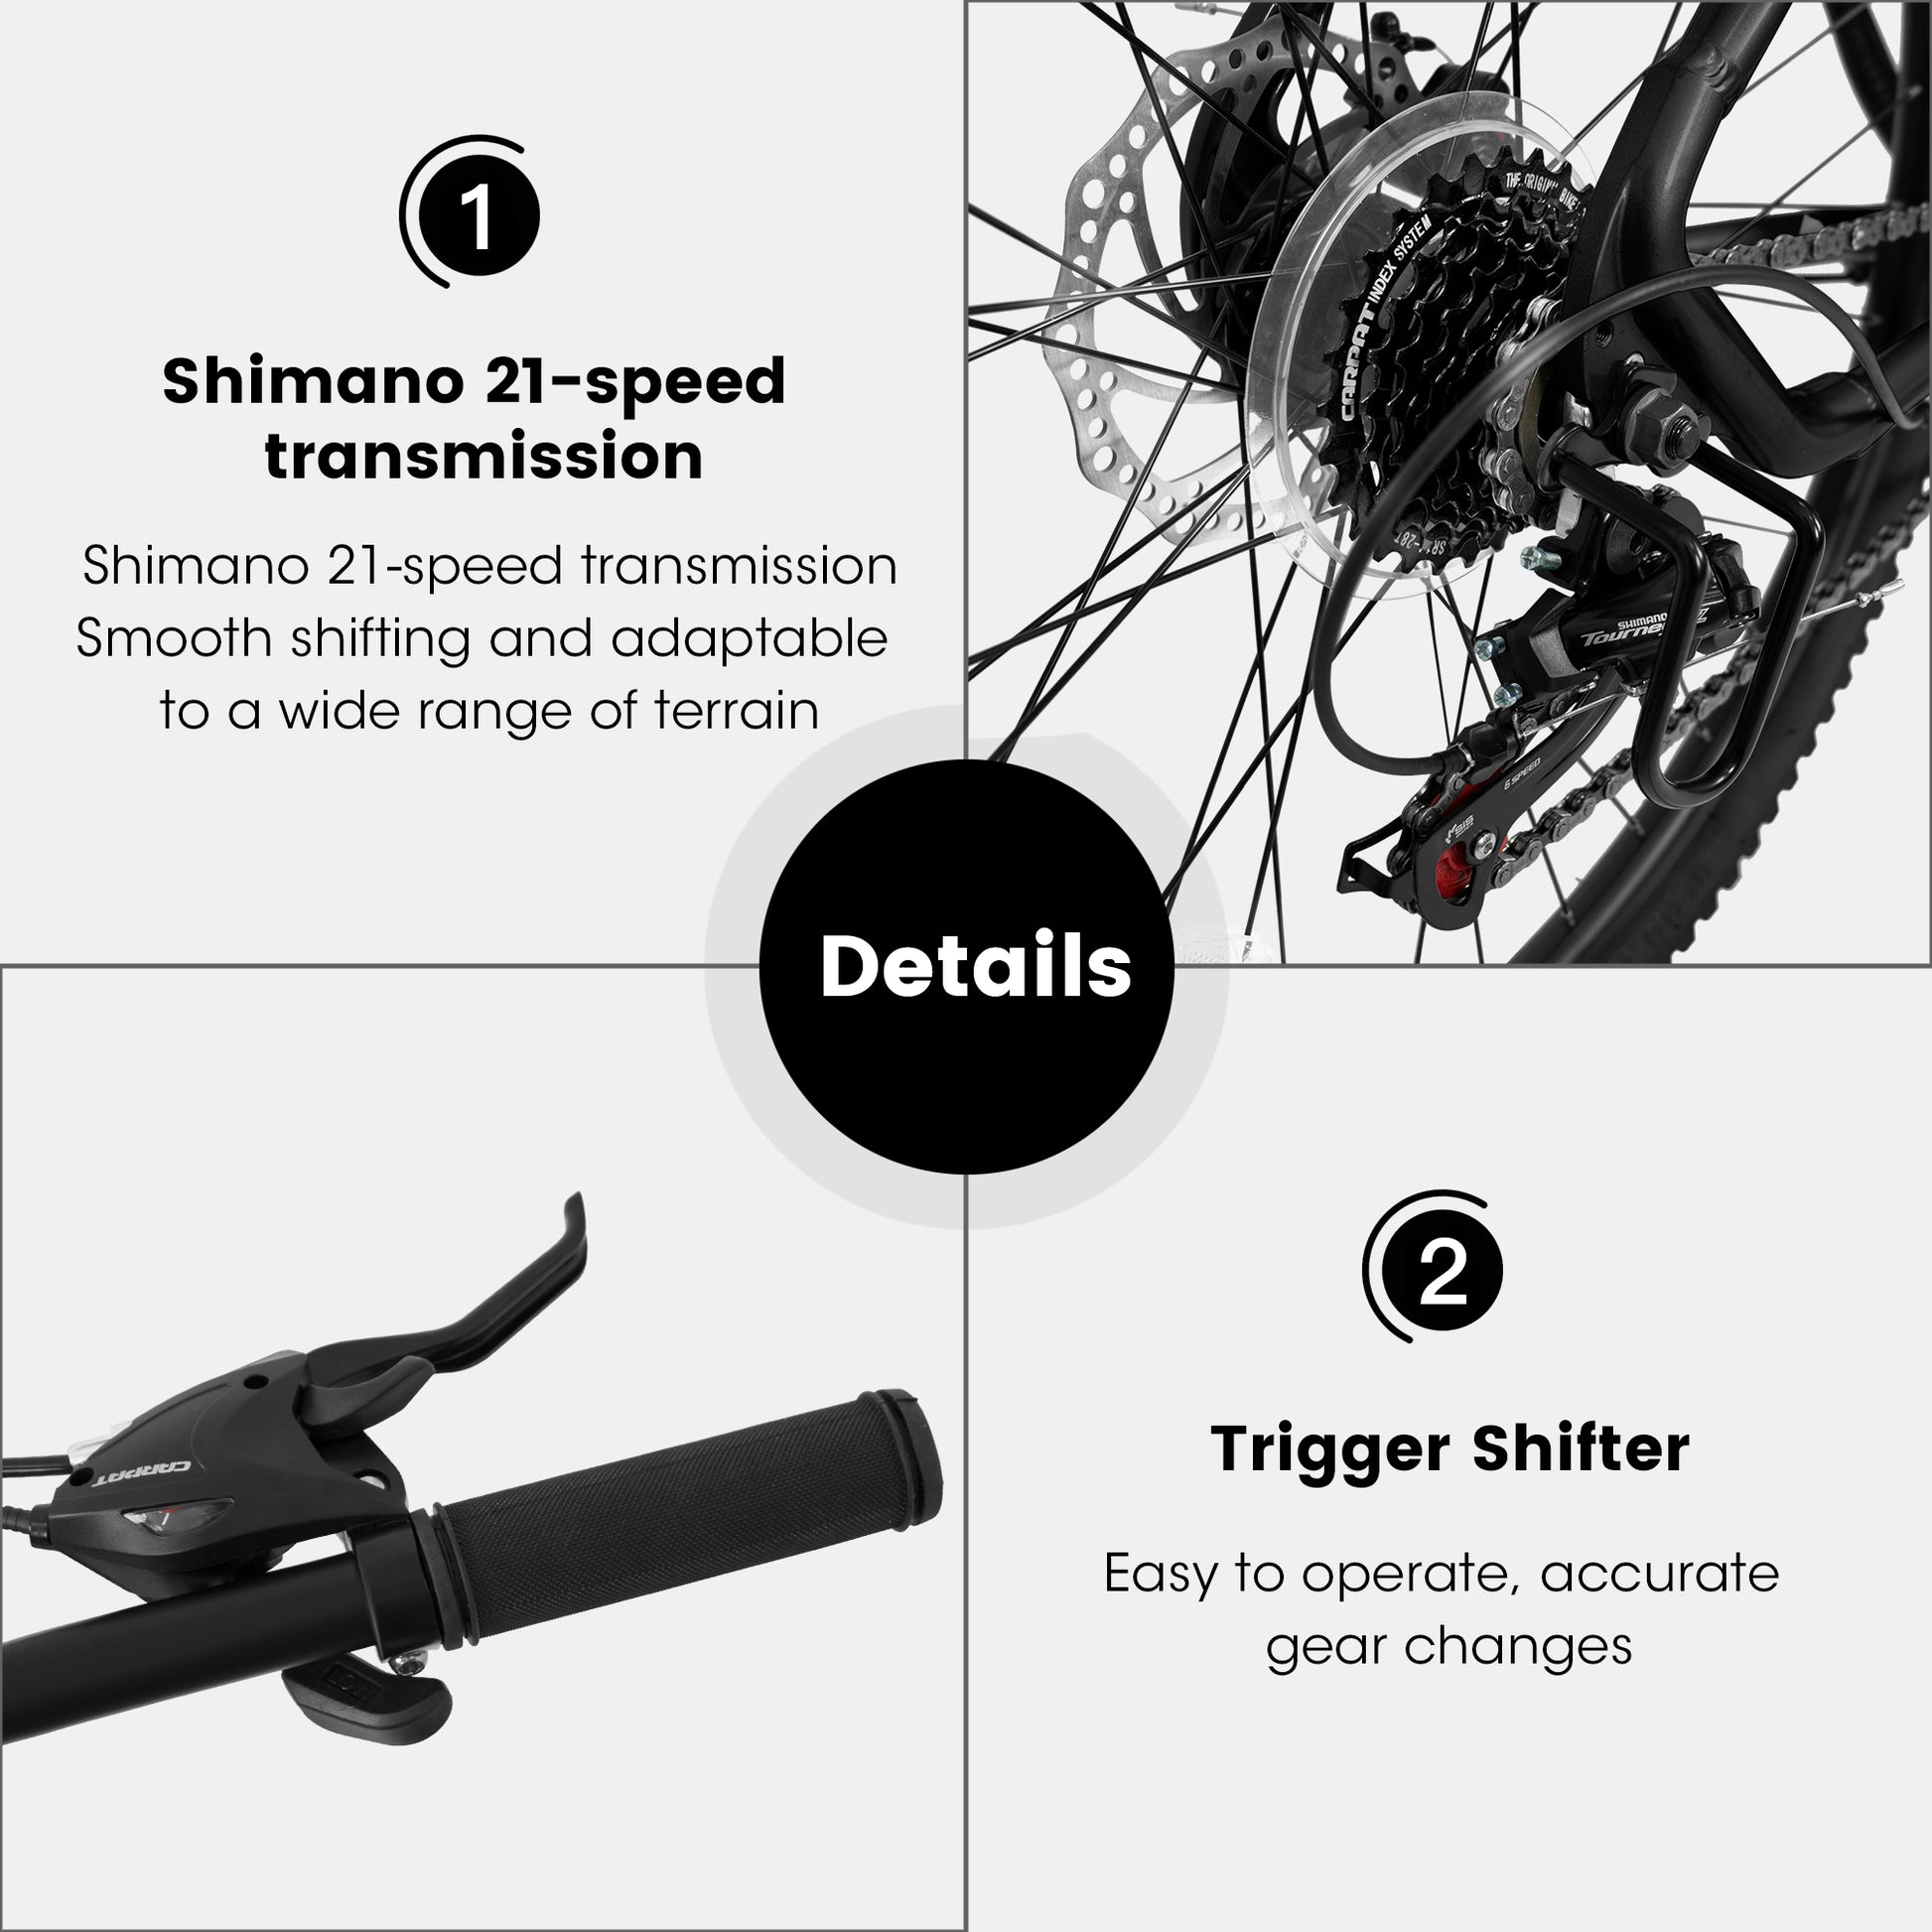 A2757 27 inch Mountain Bike 21 Speeds, Suspension cycling-black-without-anti-slip-garden &